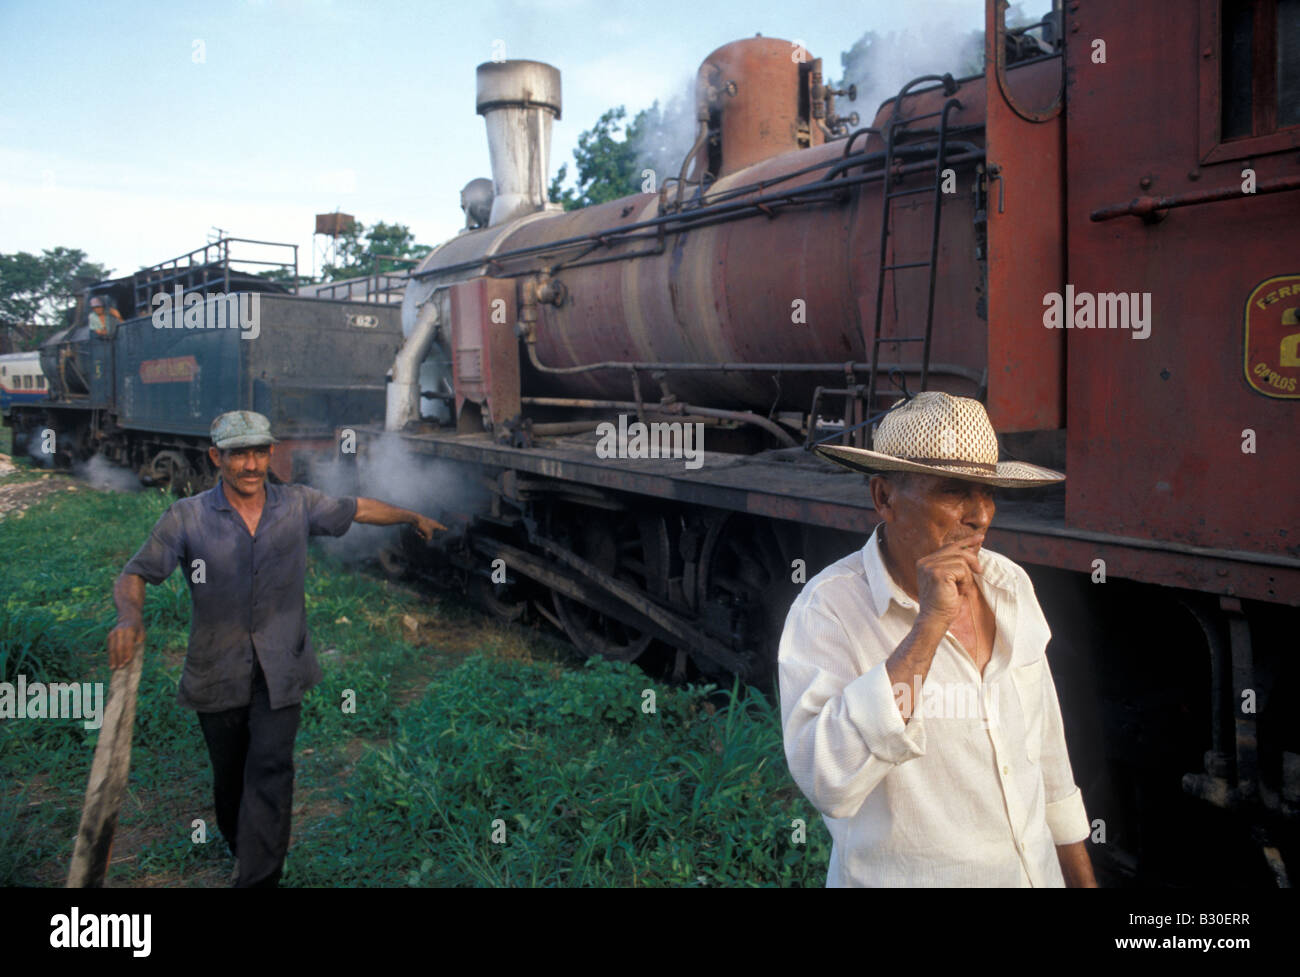 Steam trains in Asuncion Paraguay Stock Photo